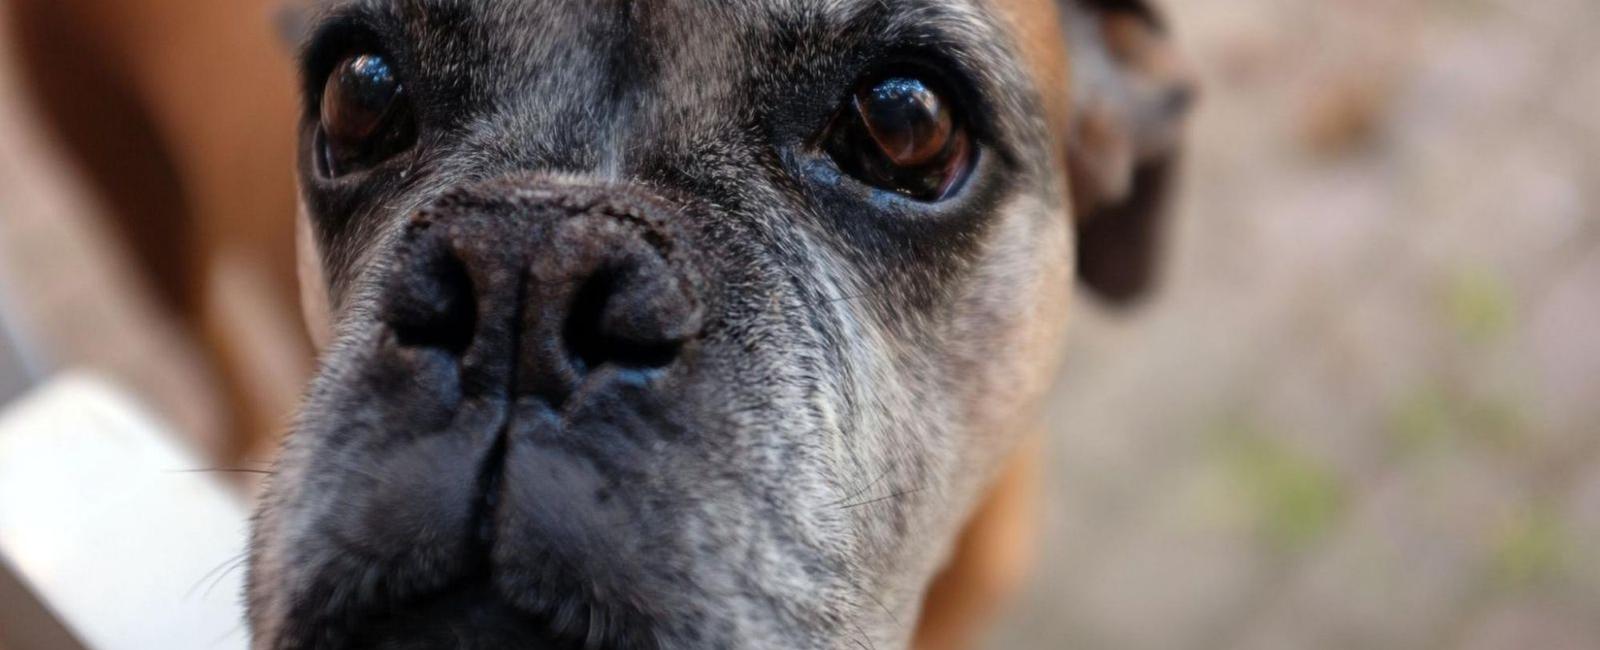 Training an Older Dog: When Is It Too Late?